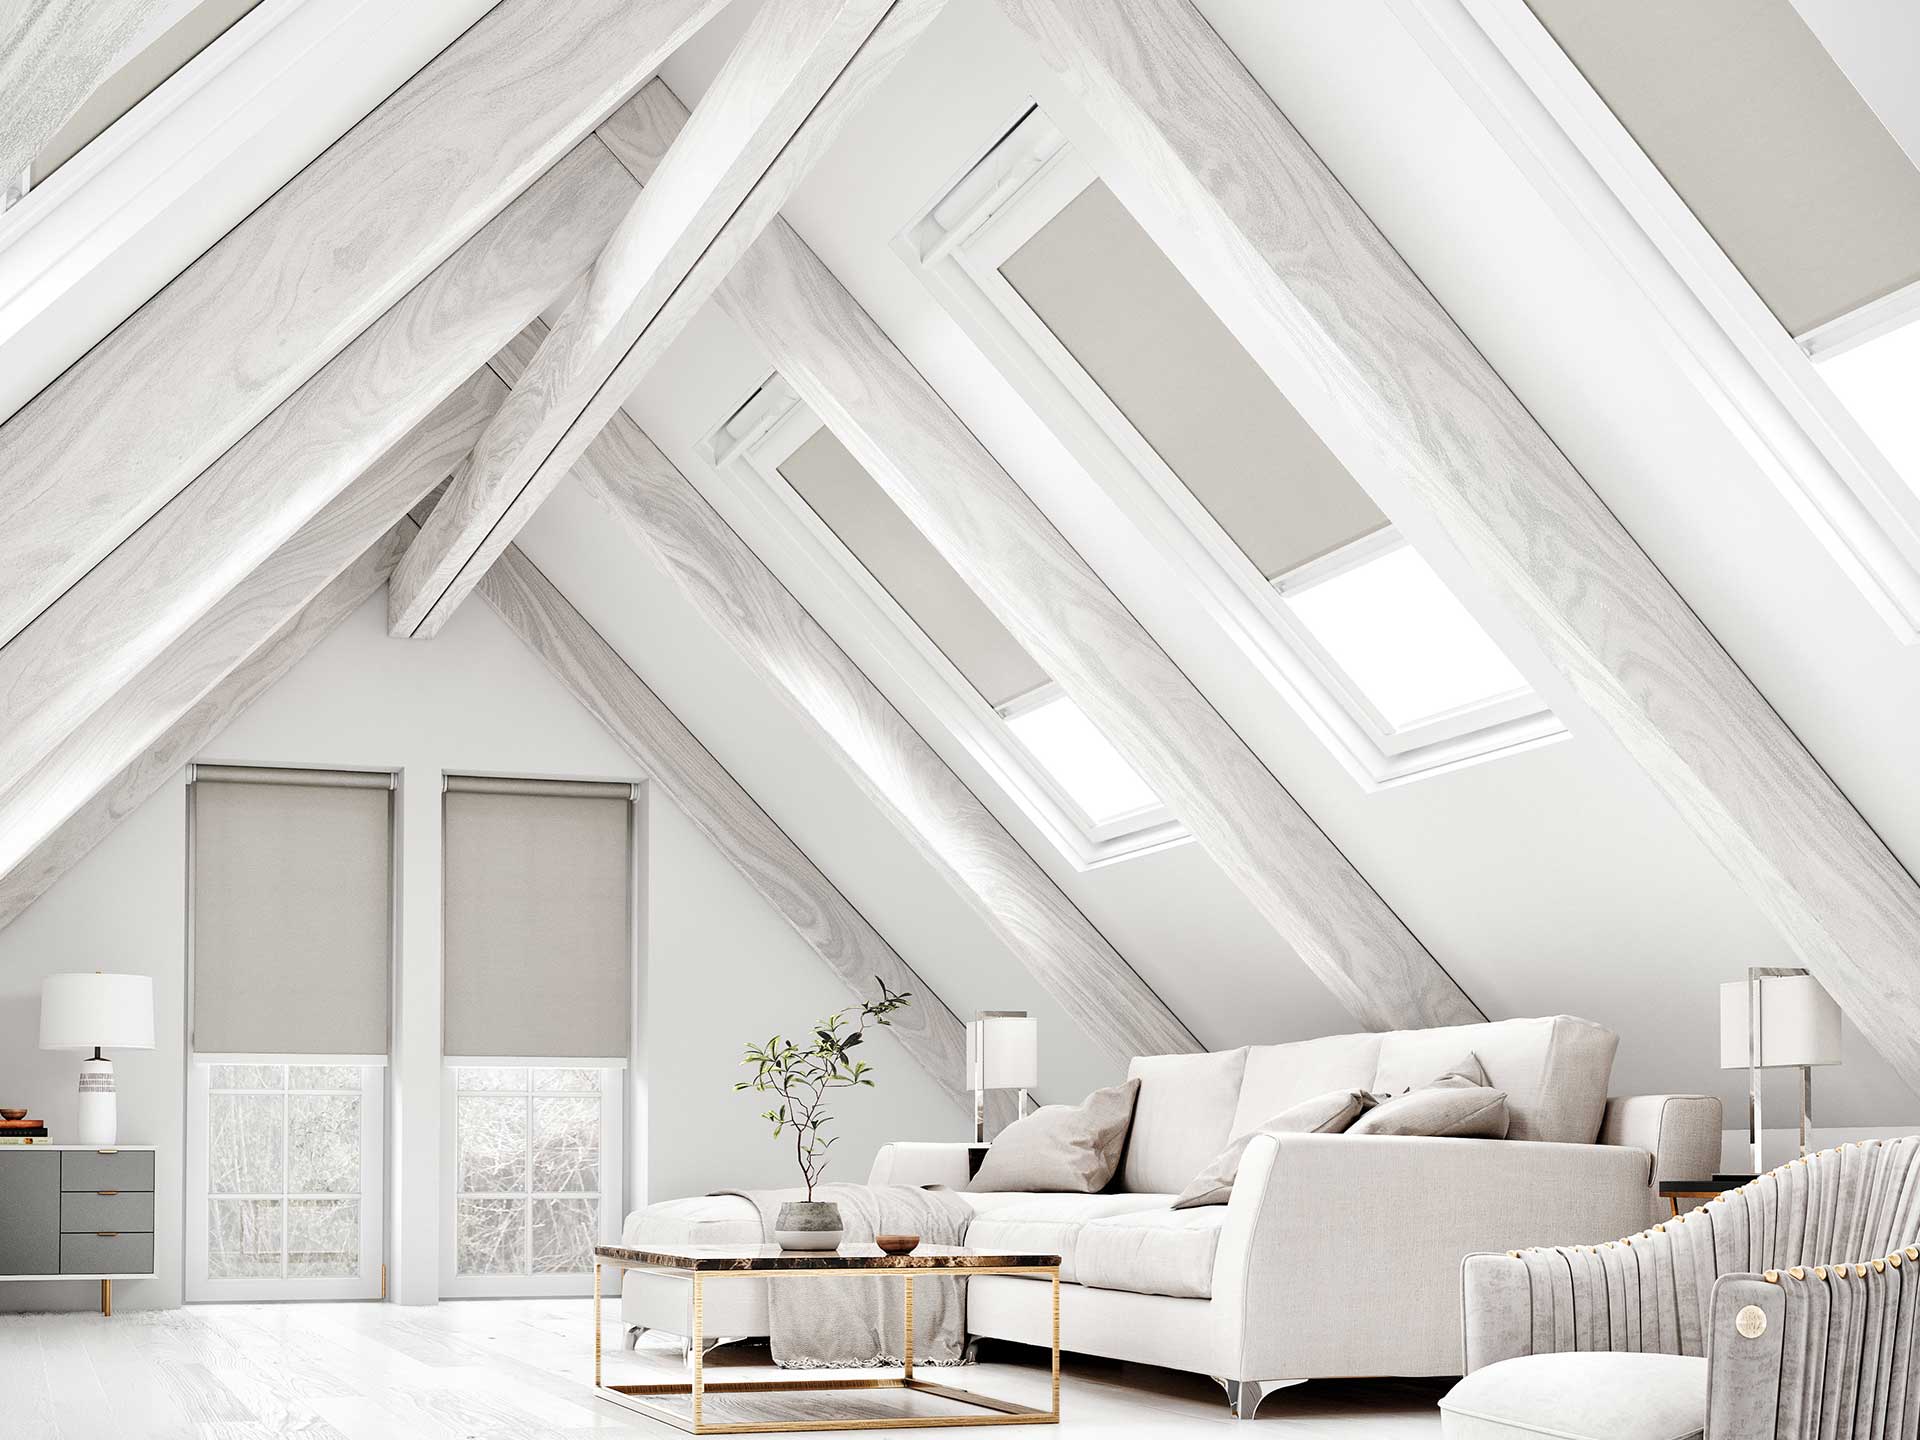 A steep pitch roof calls for long skylights